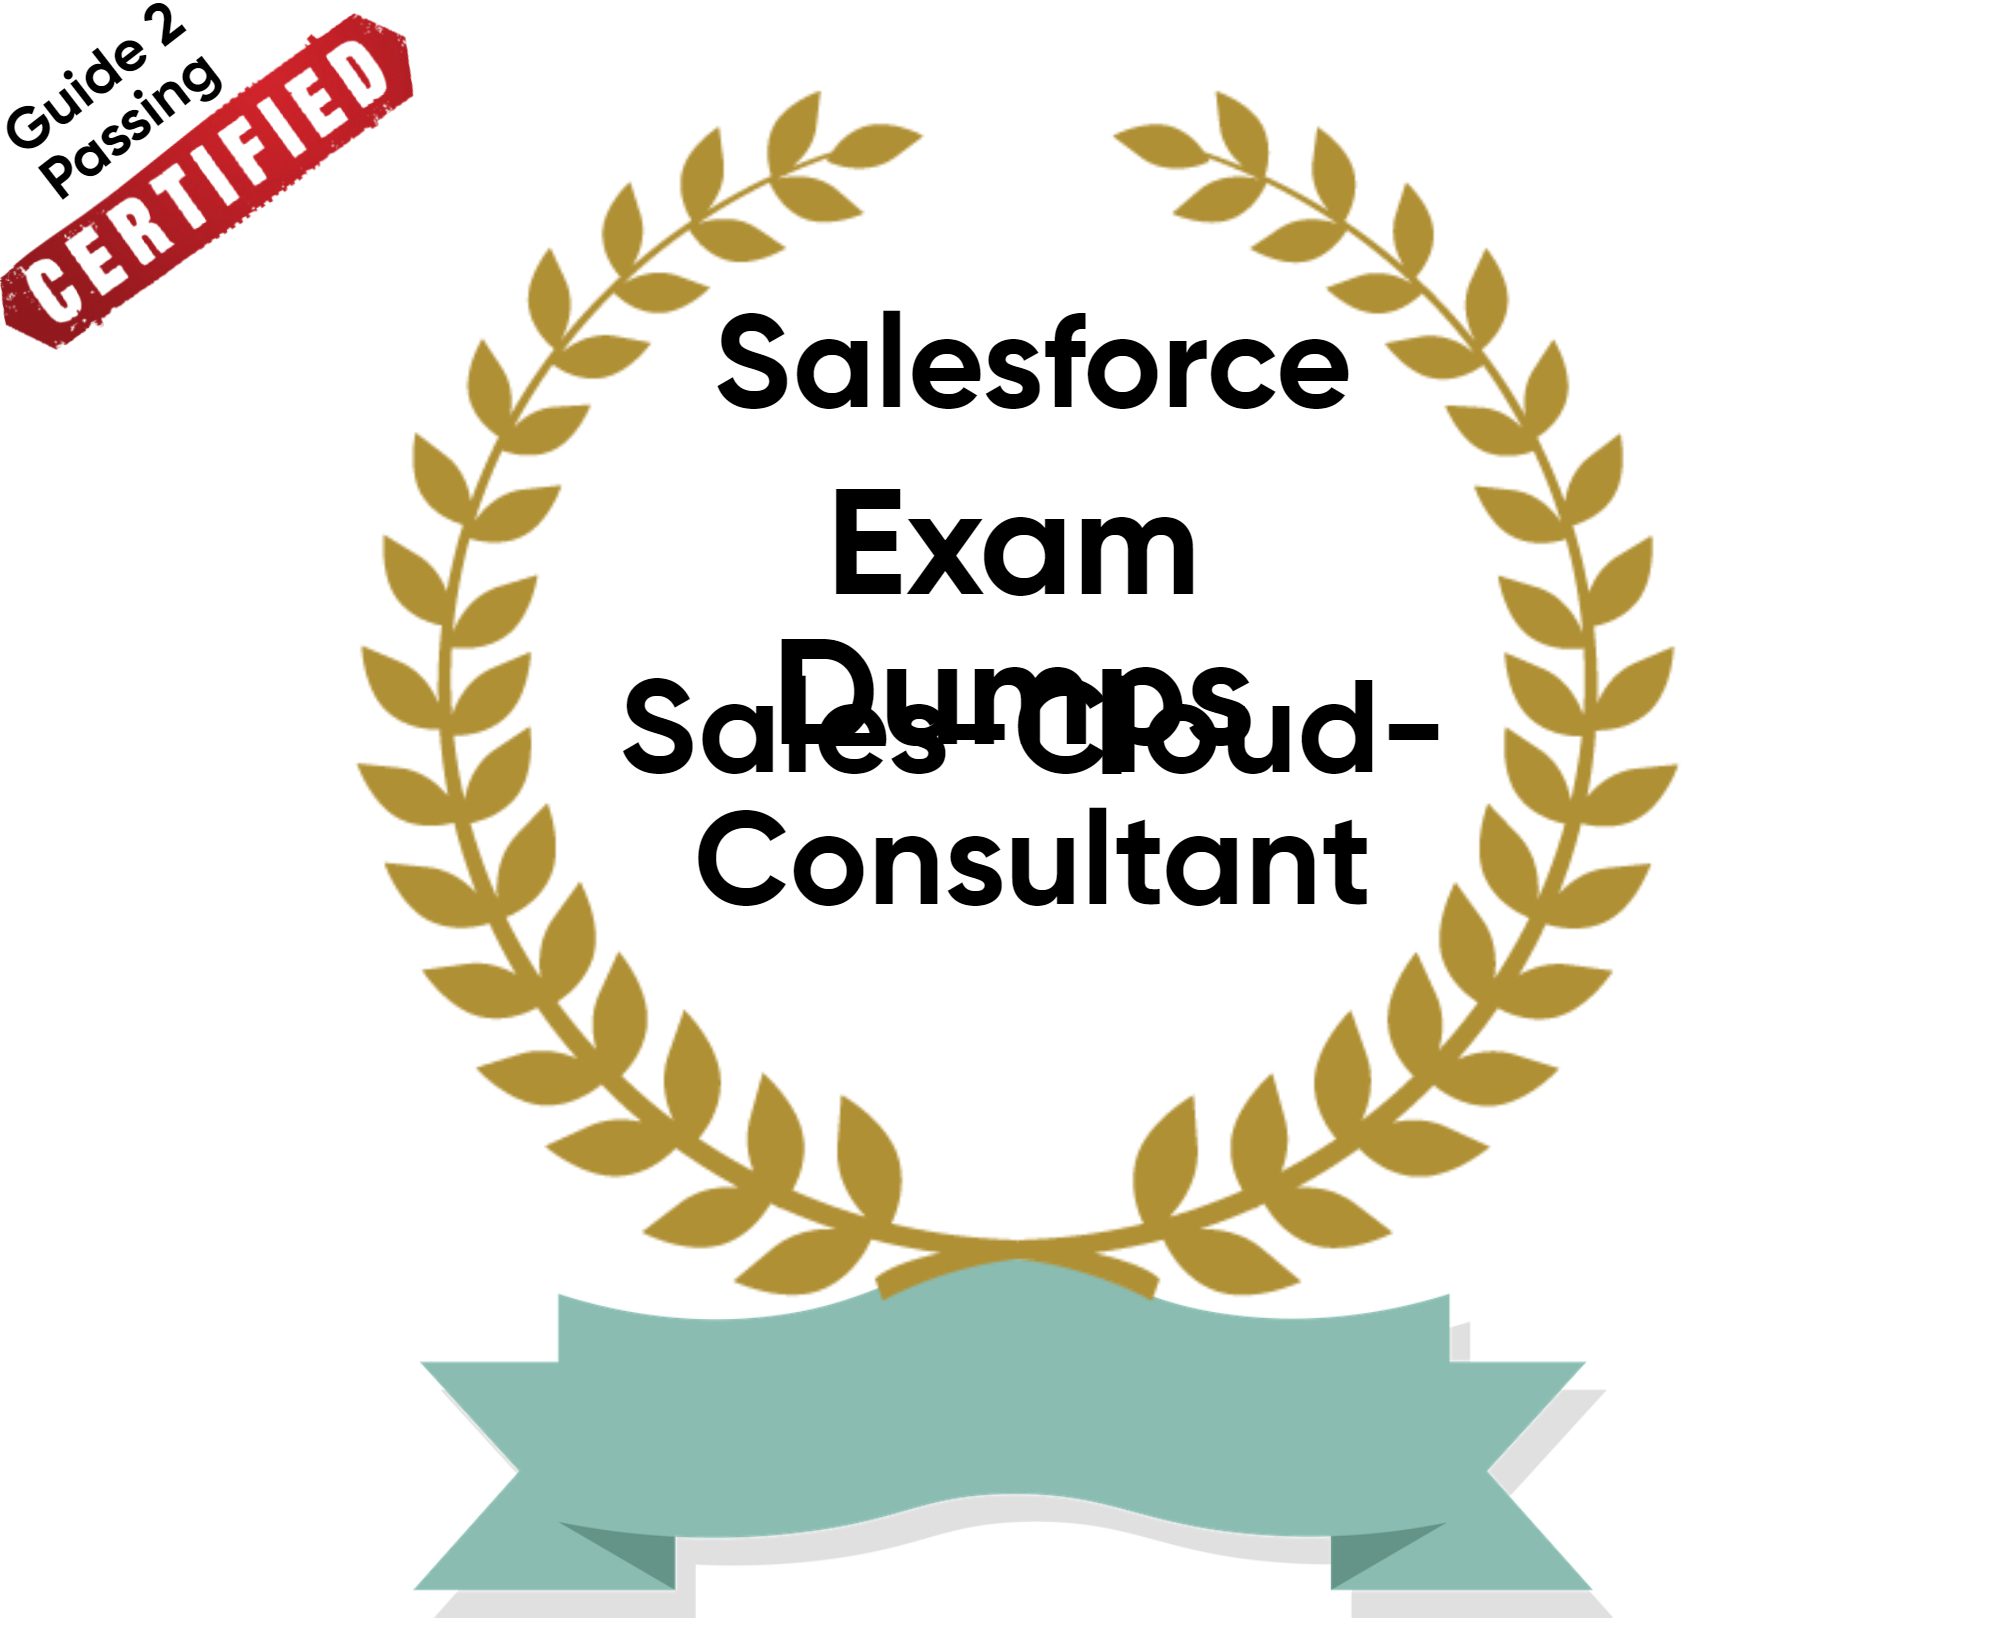 Pass Your Salesforce Sales-Cloud-Consultant Exam Dumps From Guide 2 Passing